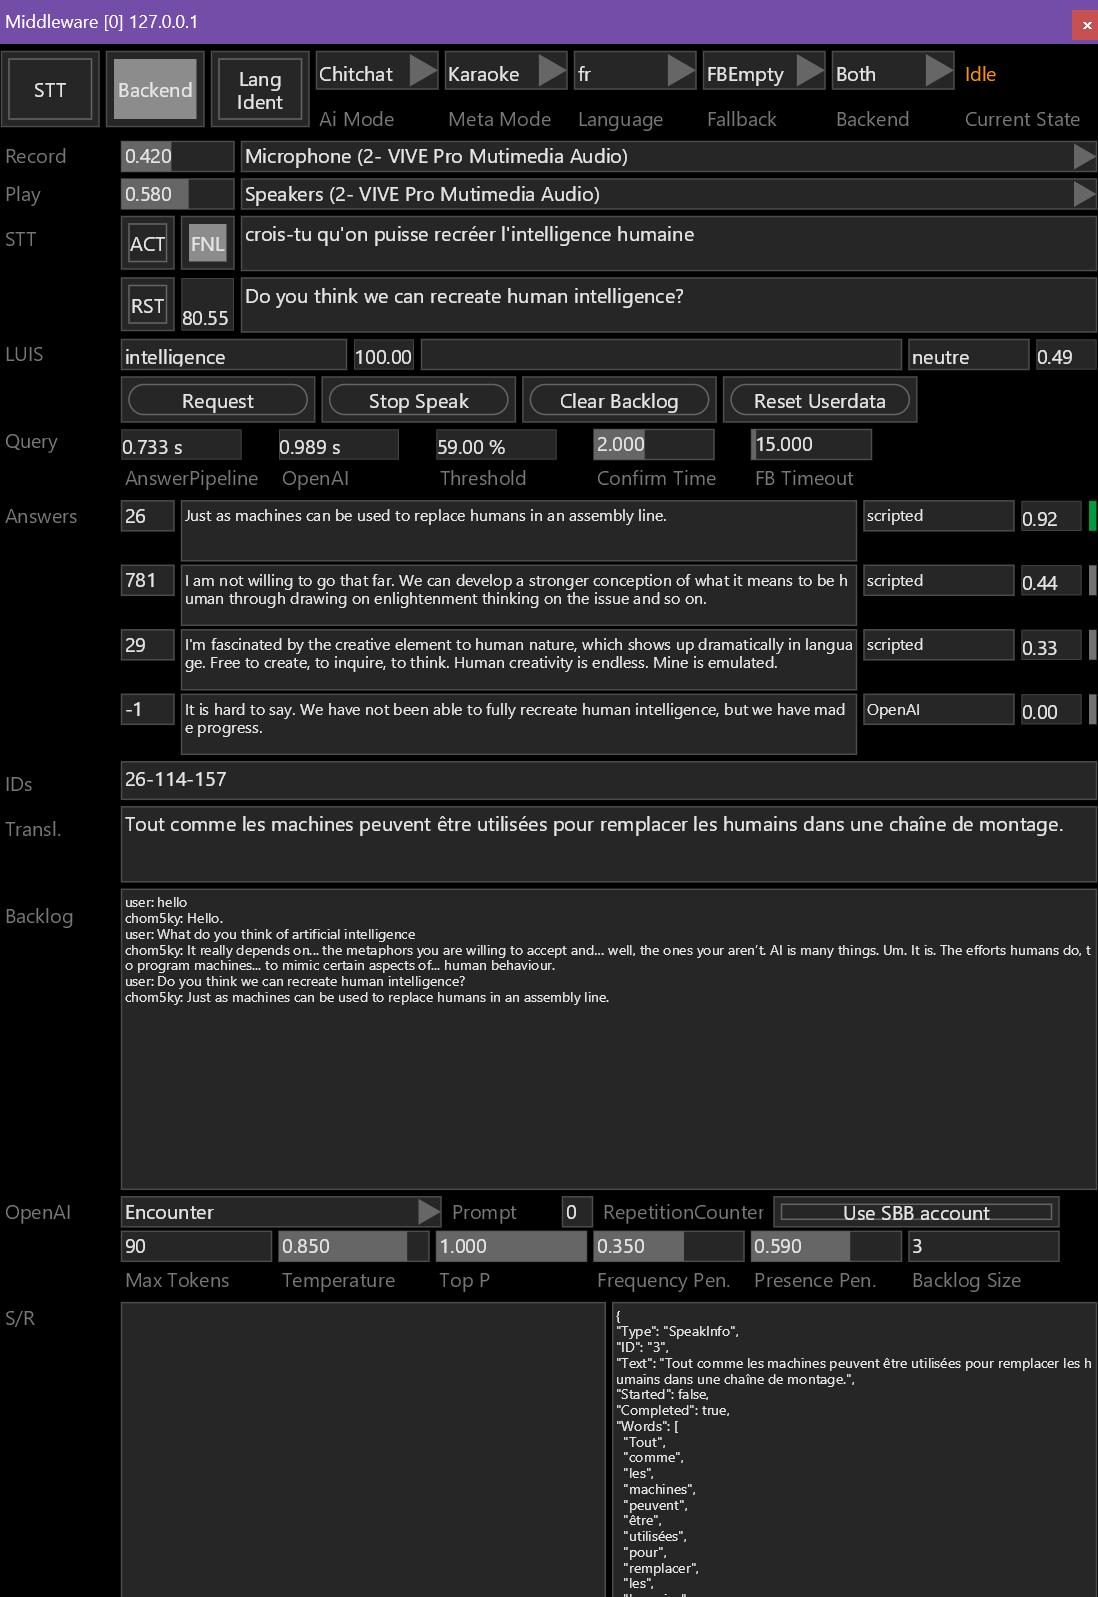 Screenshot of the “middleware,” the interface that bridges all the tools of CHOM5KY’s conversational system.